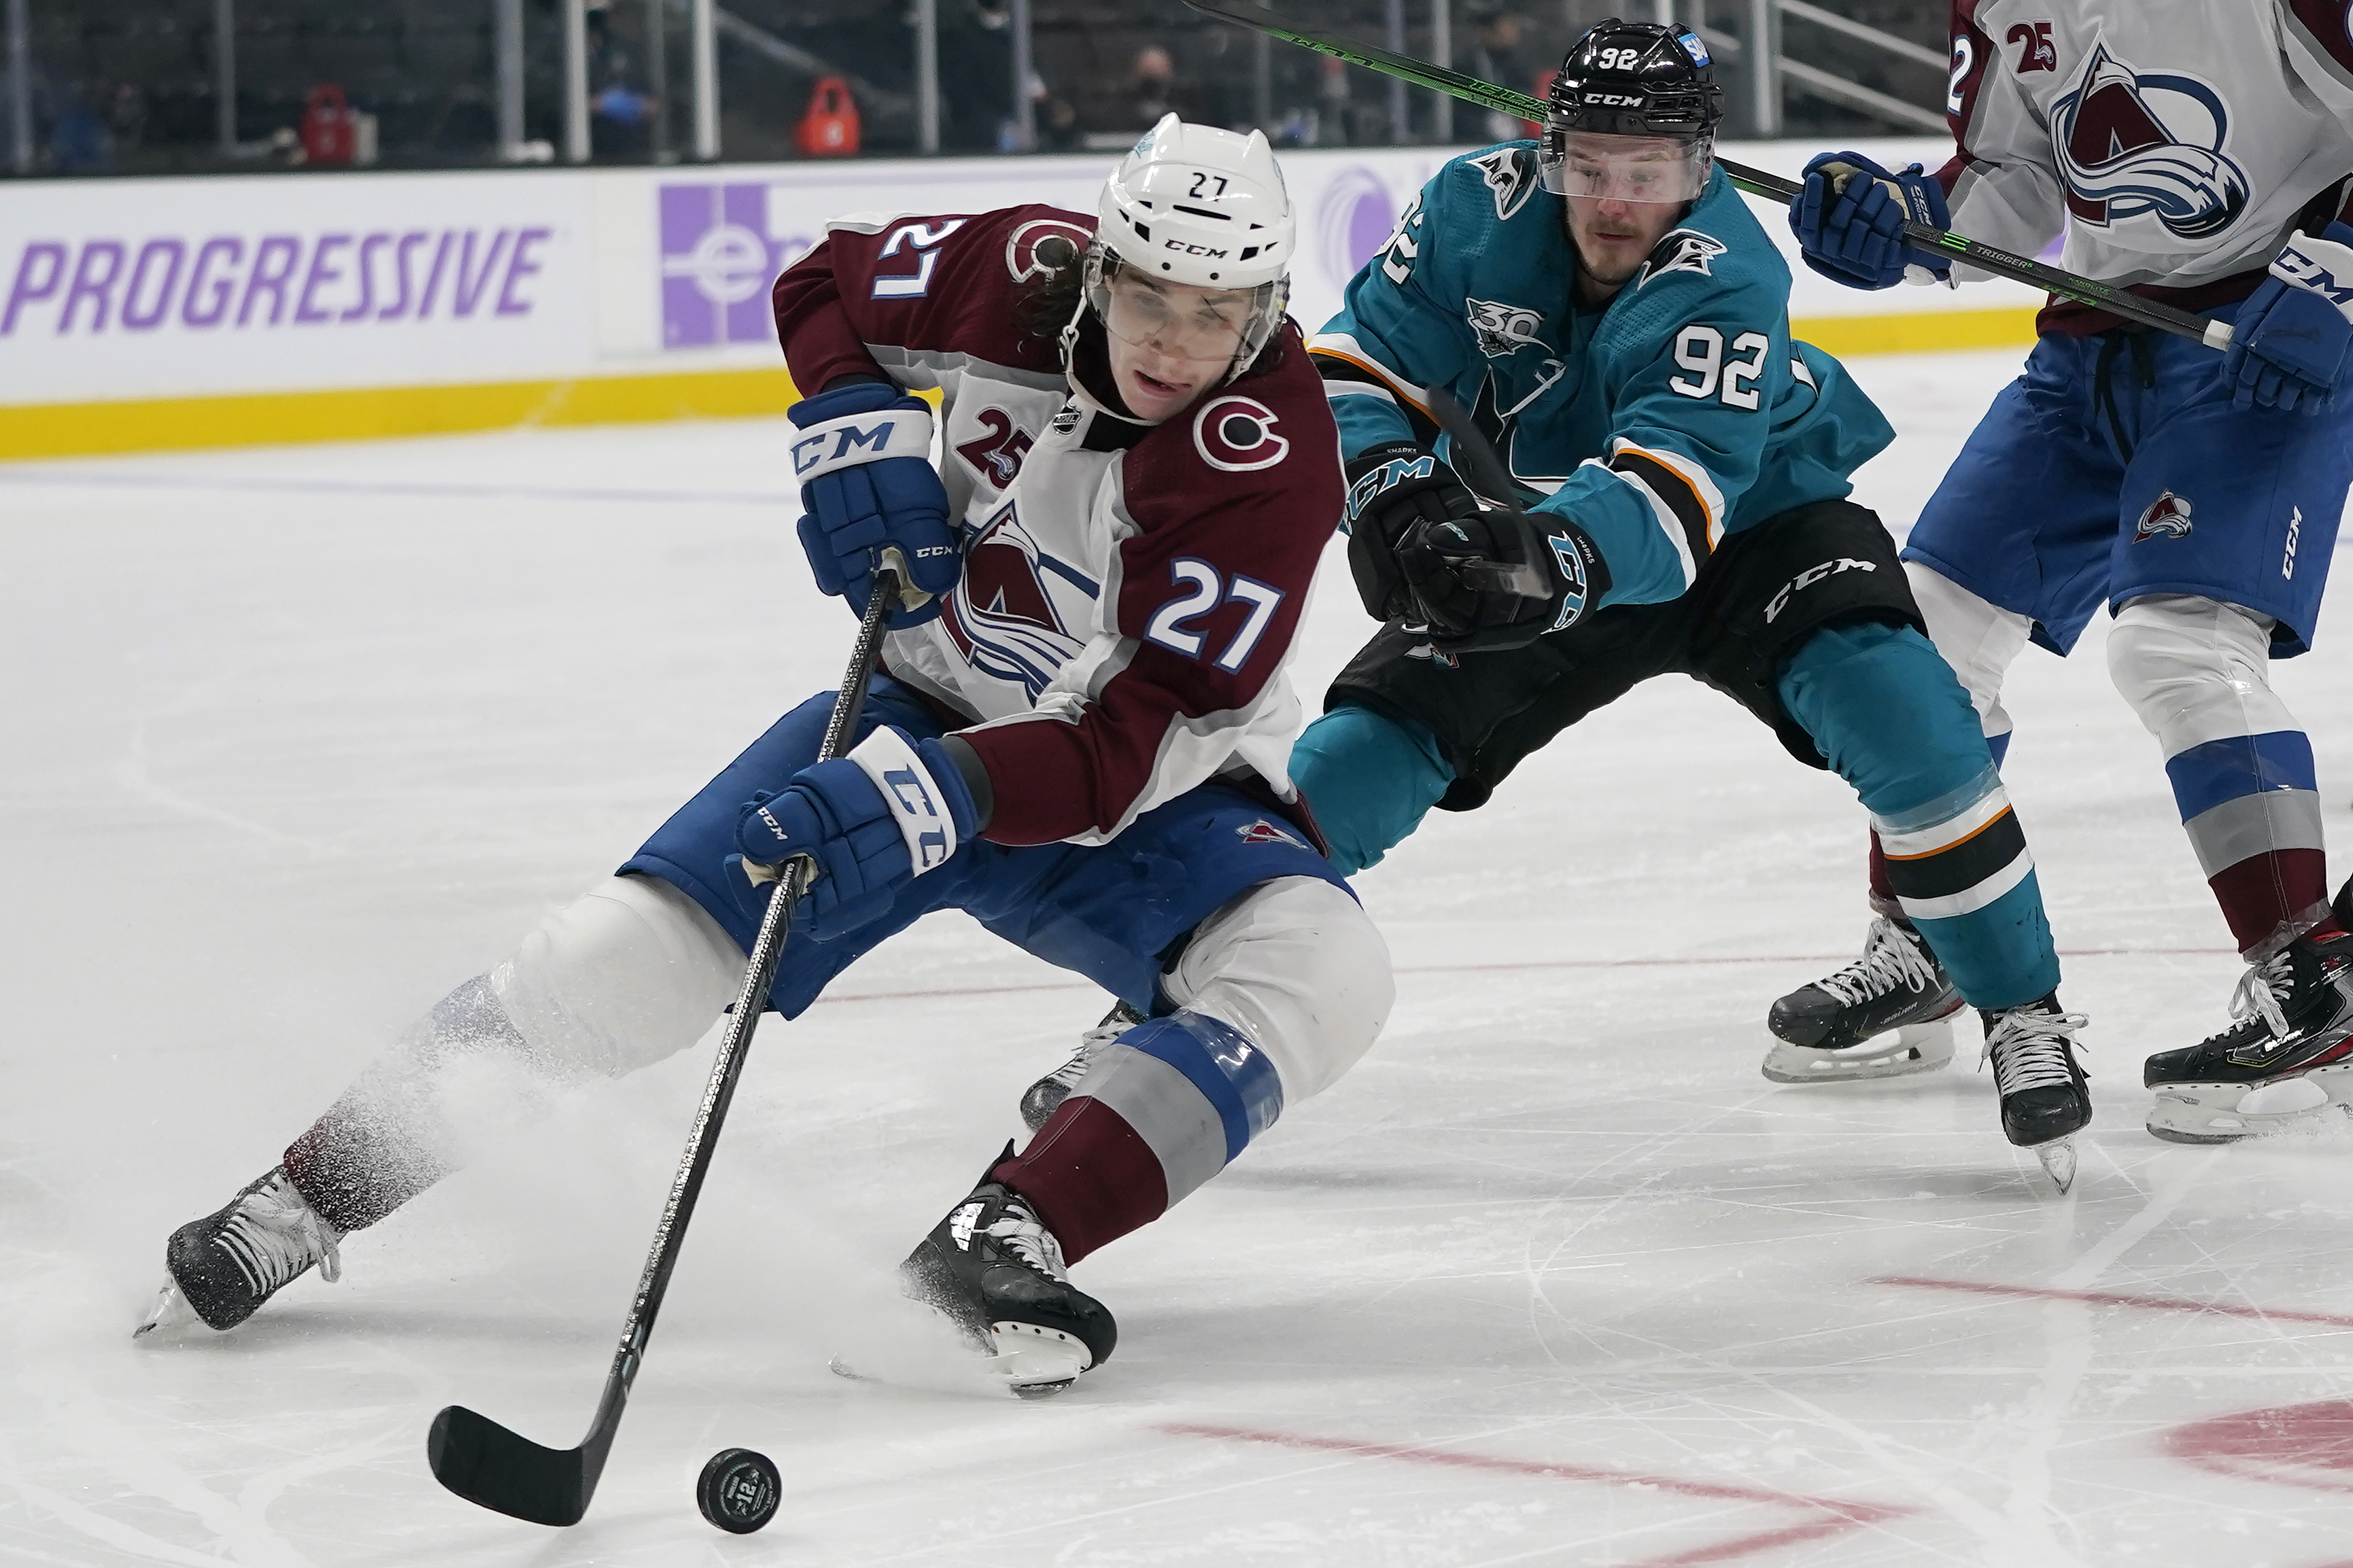 NHL How to LIVE STREAM FREE the Colorado Avalanche at San Jose Sharks Wednesday (5-5-21)